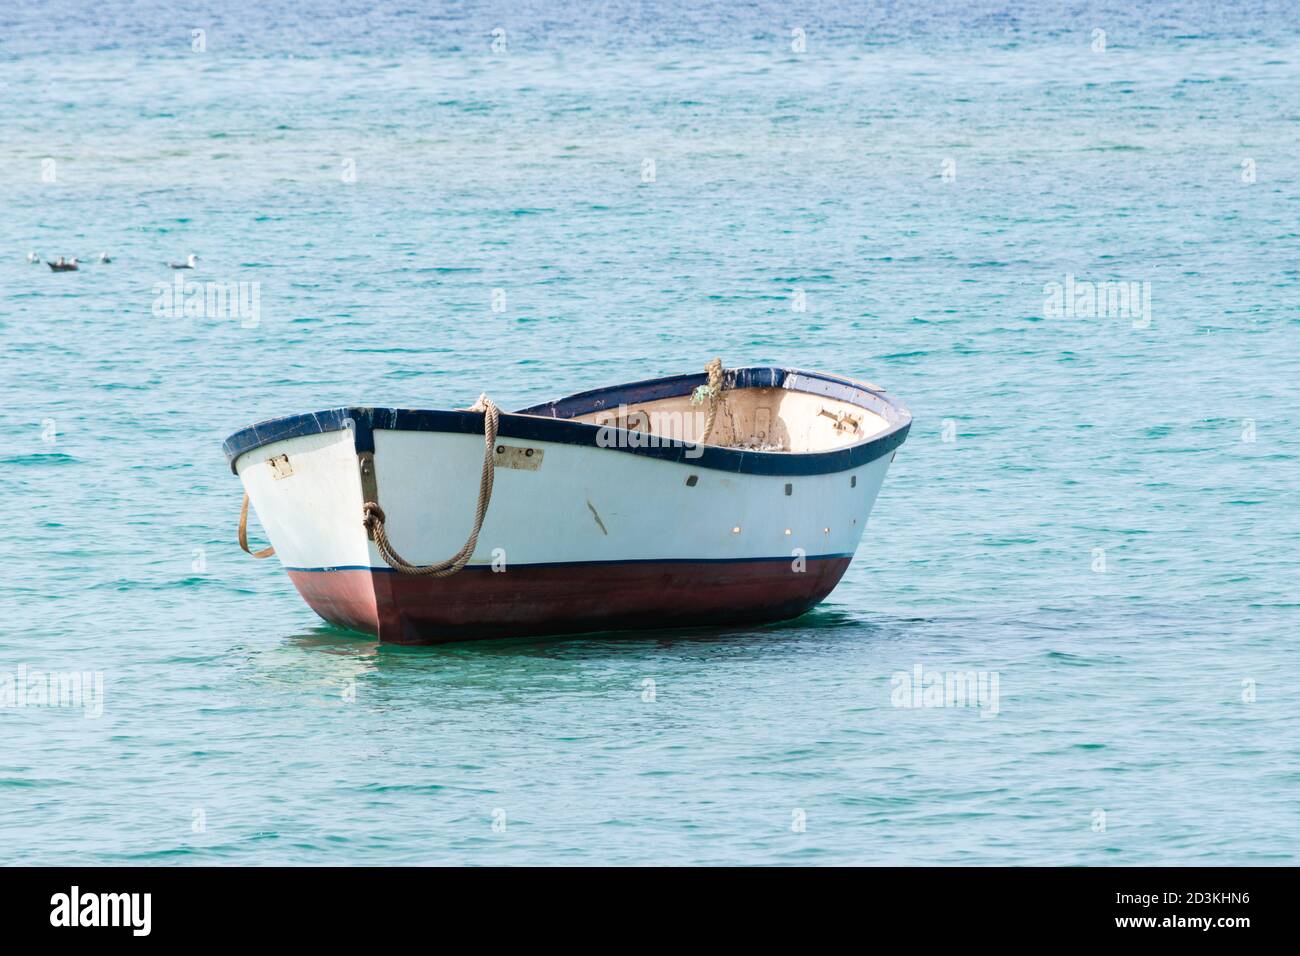 small boat floating in the middle of the sea, Canary Islands